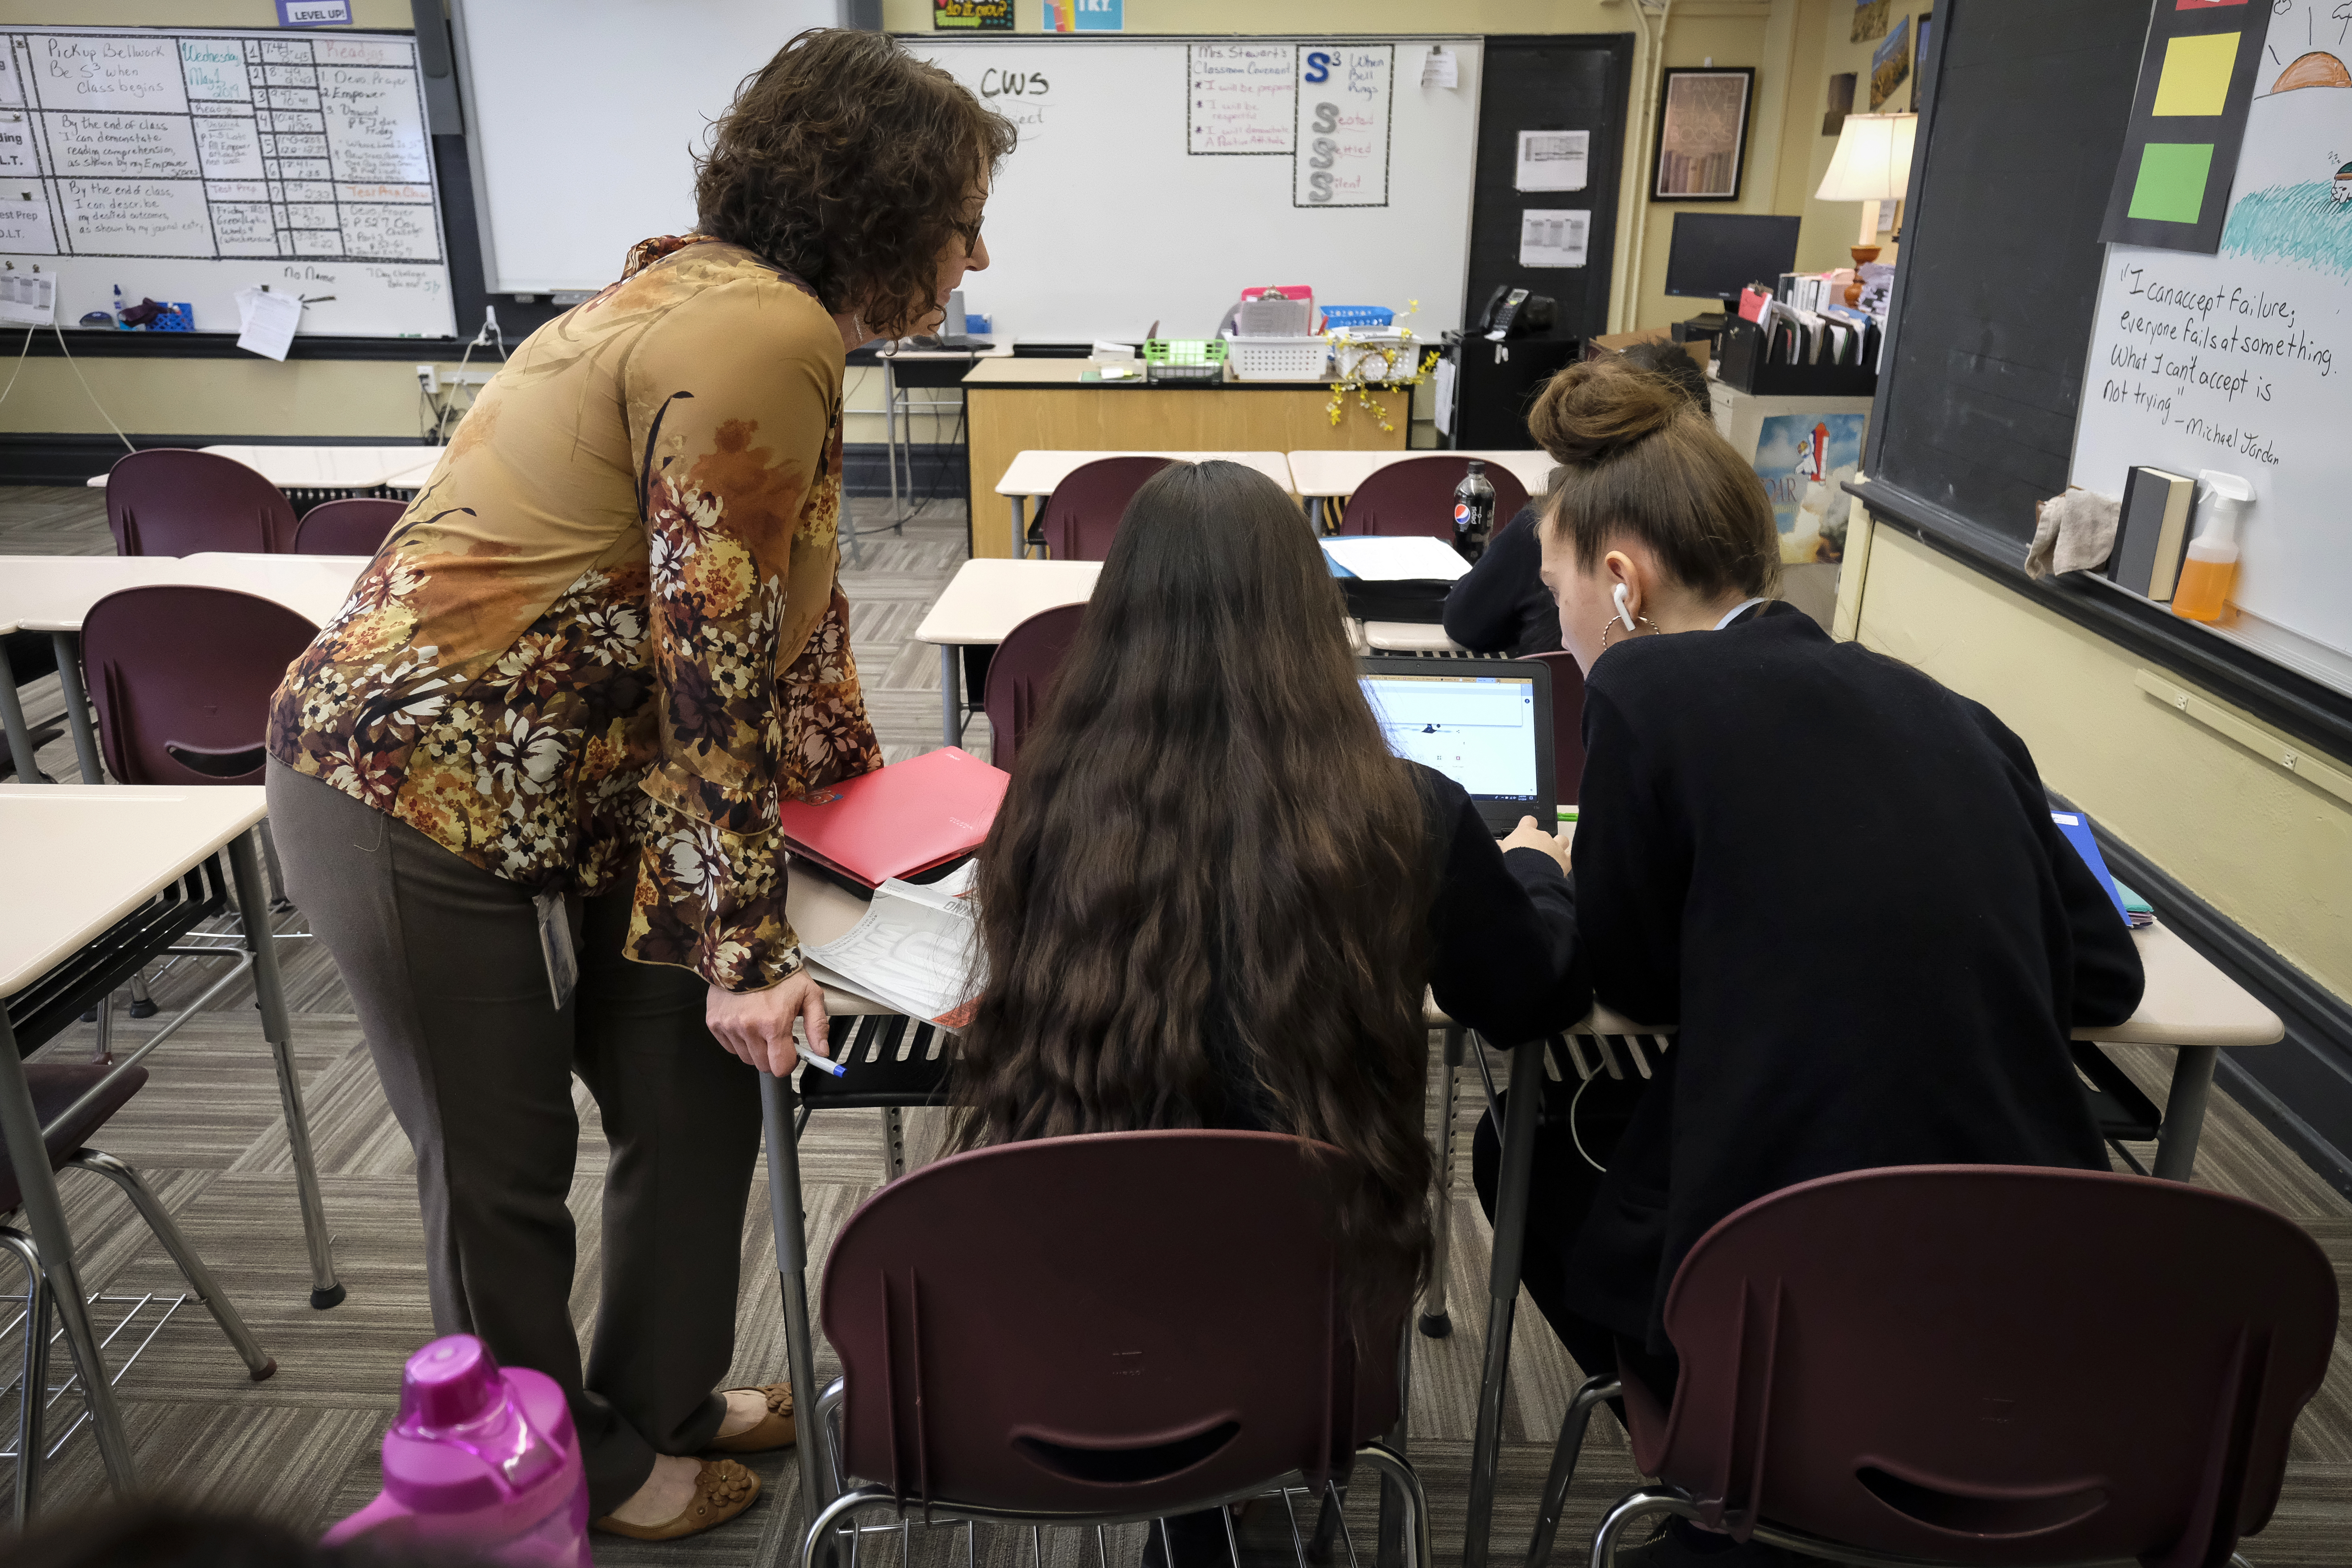 In a classroom, two students work together on a laptop while a teacher looks on.